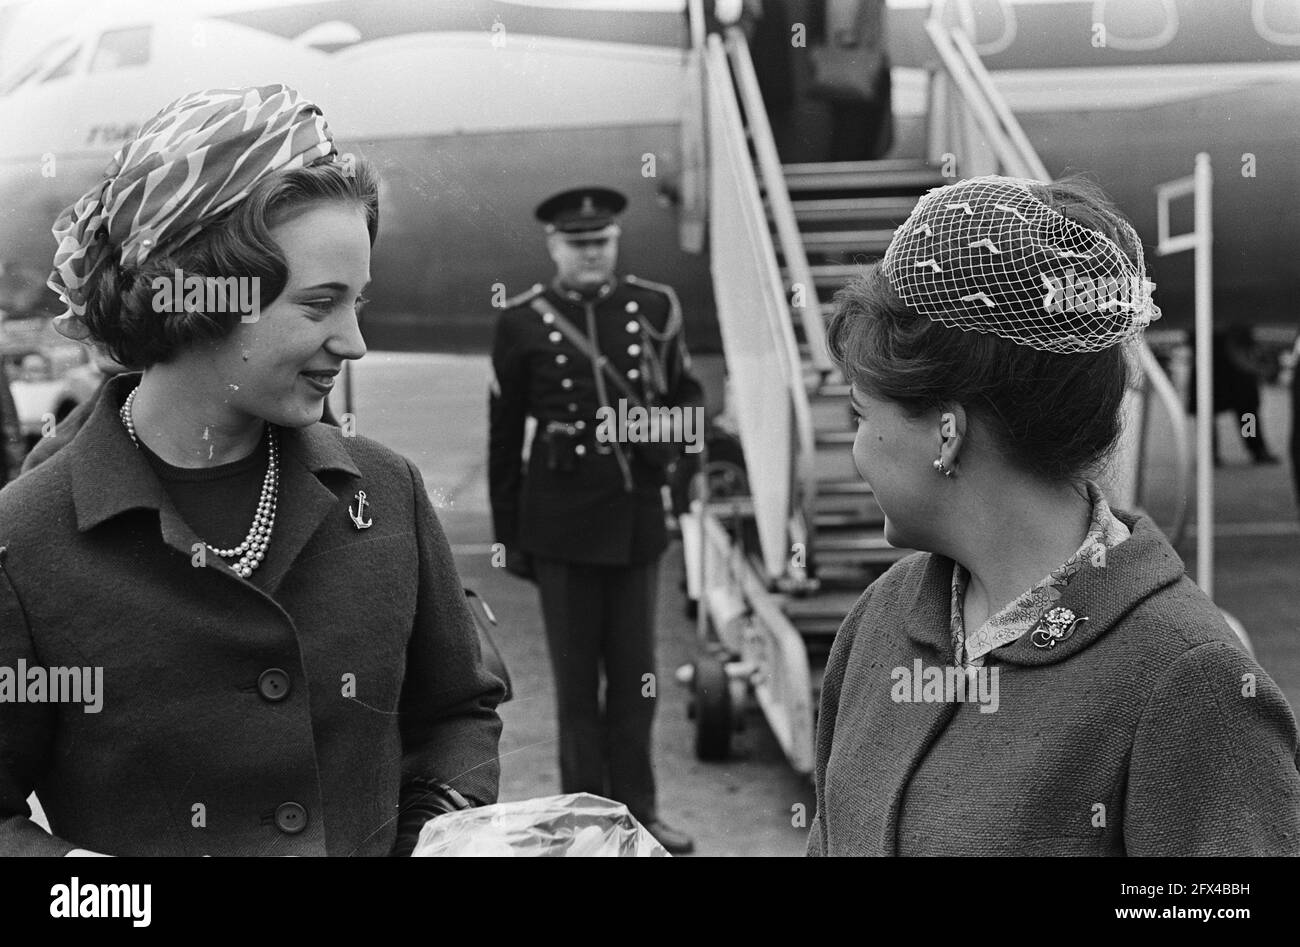 Danish Princess Benedikte in the Netherlands, Princess Benedikte and Princess Margriet, April 6, 1965, The Netherlands, 20th century press agency photo, news to remember, documentary, historic photography 1945-1990, visual stories, human history of the Twentieth Century, capturing moments in time Stock Photo